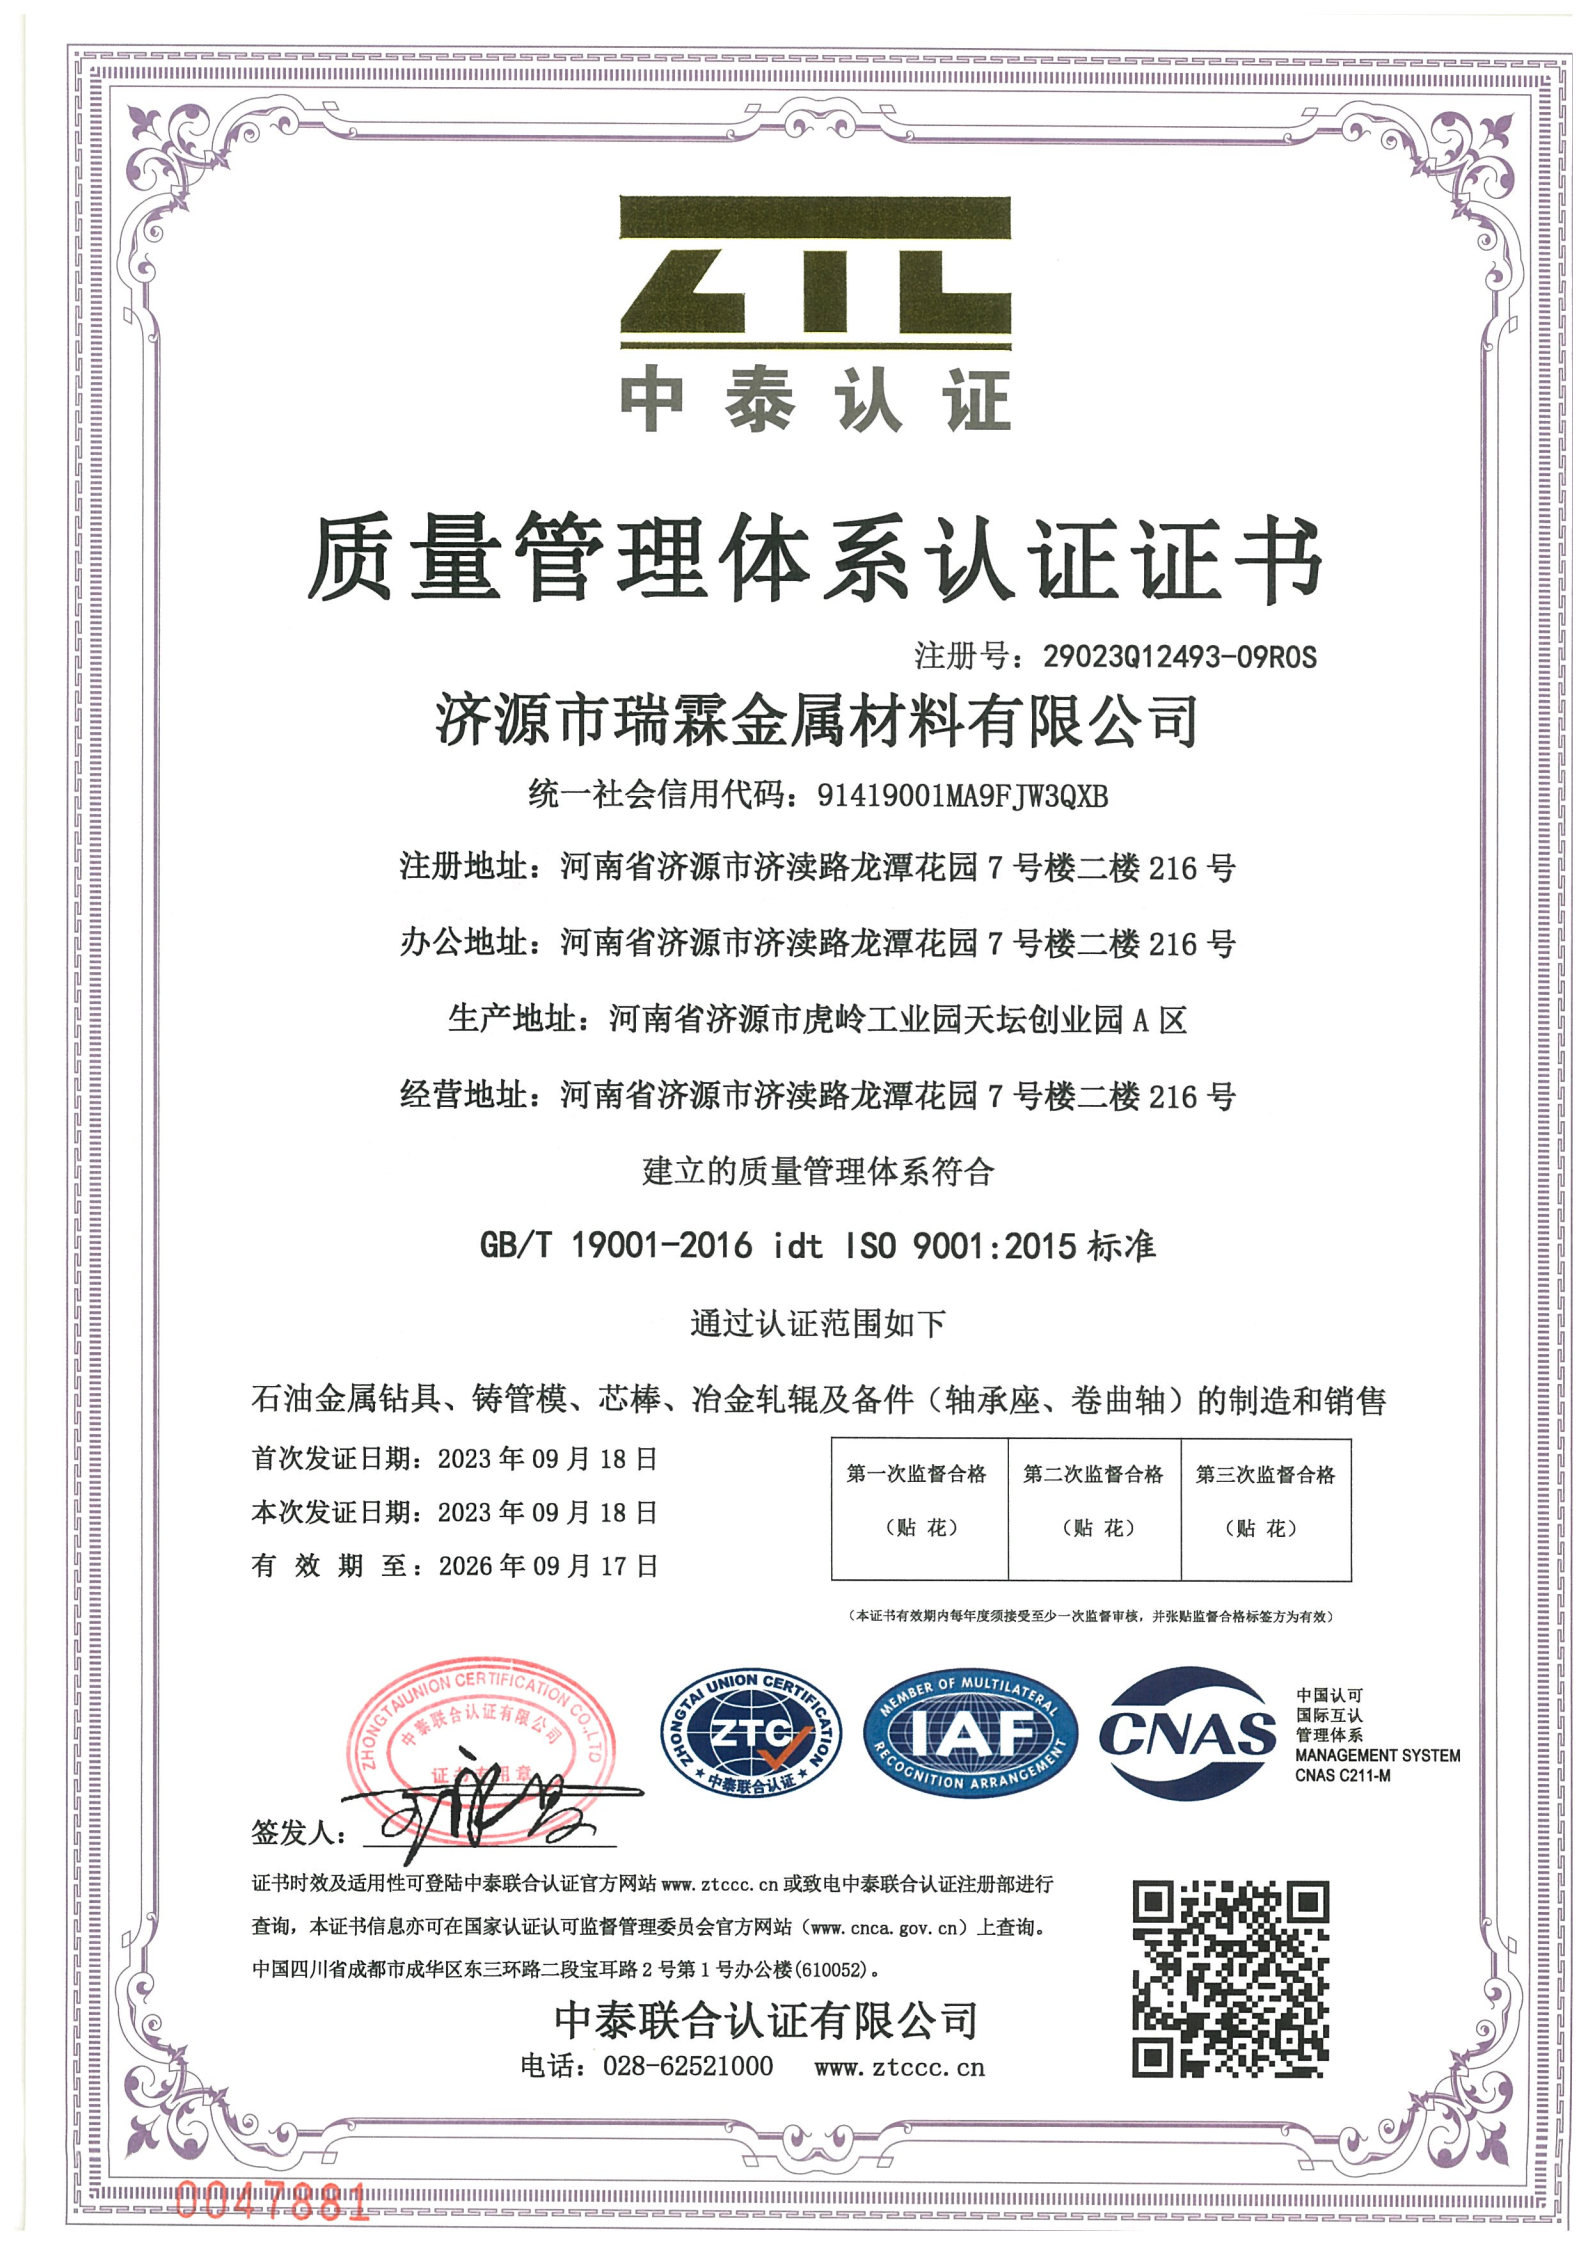 ISO9000 Certificate_Page1.jpg